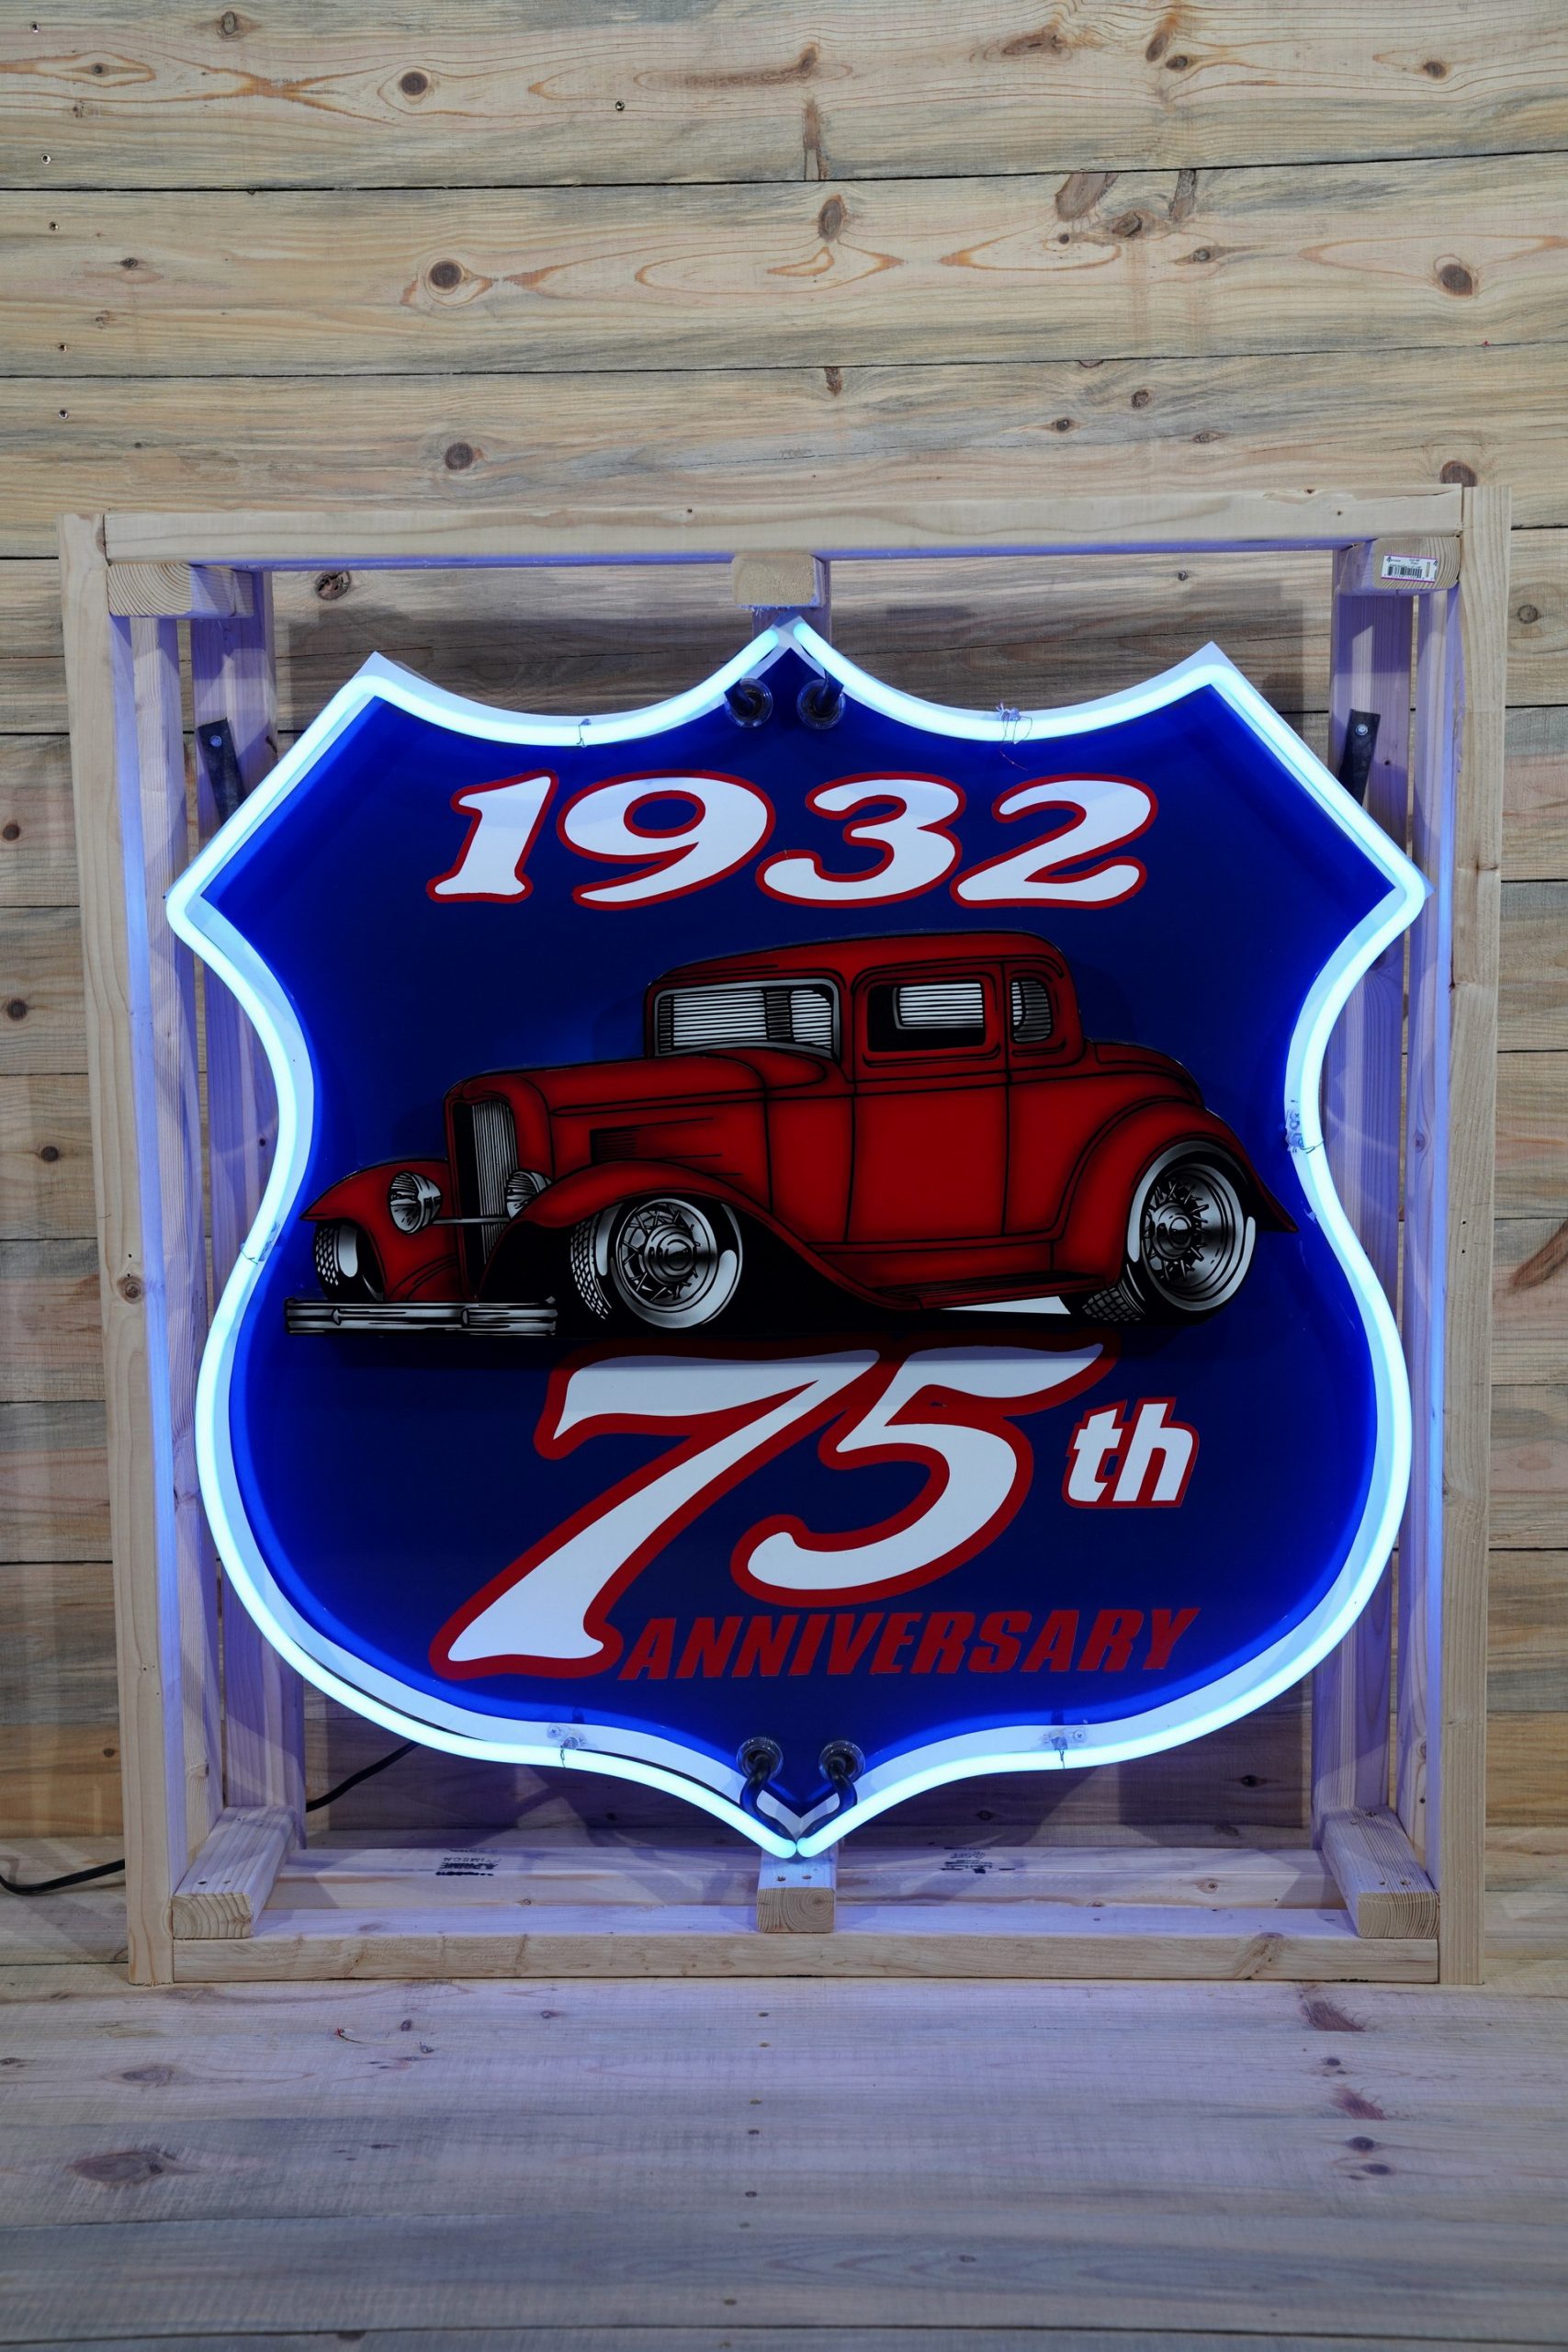 Vintage Neon Signs: Antique Advertising | Auctions